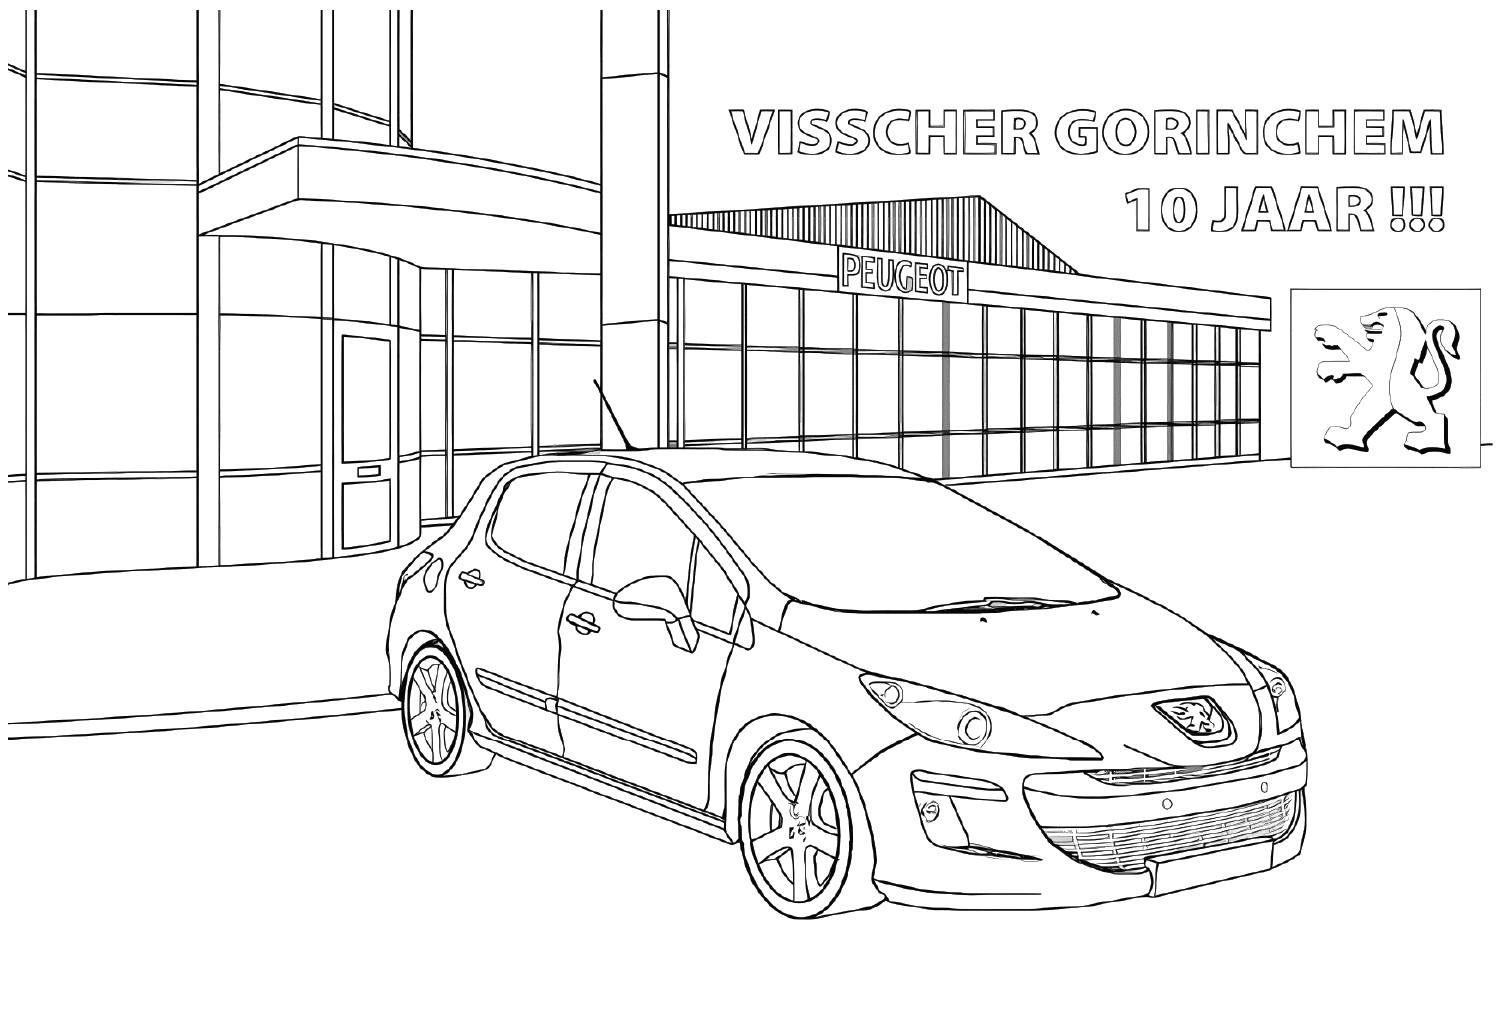 Peugeot Car Coloring Page from Peugeot